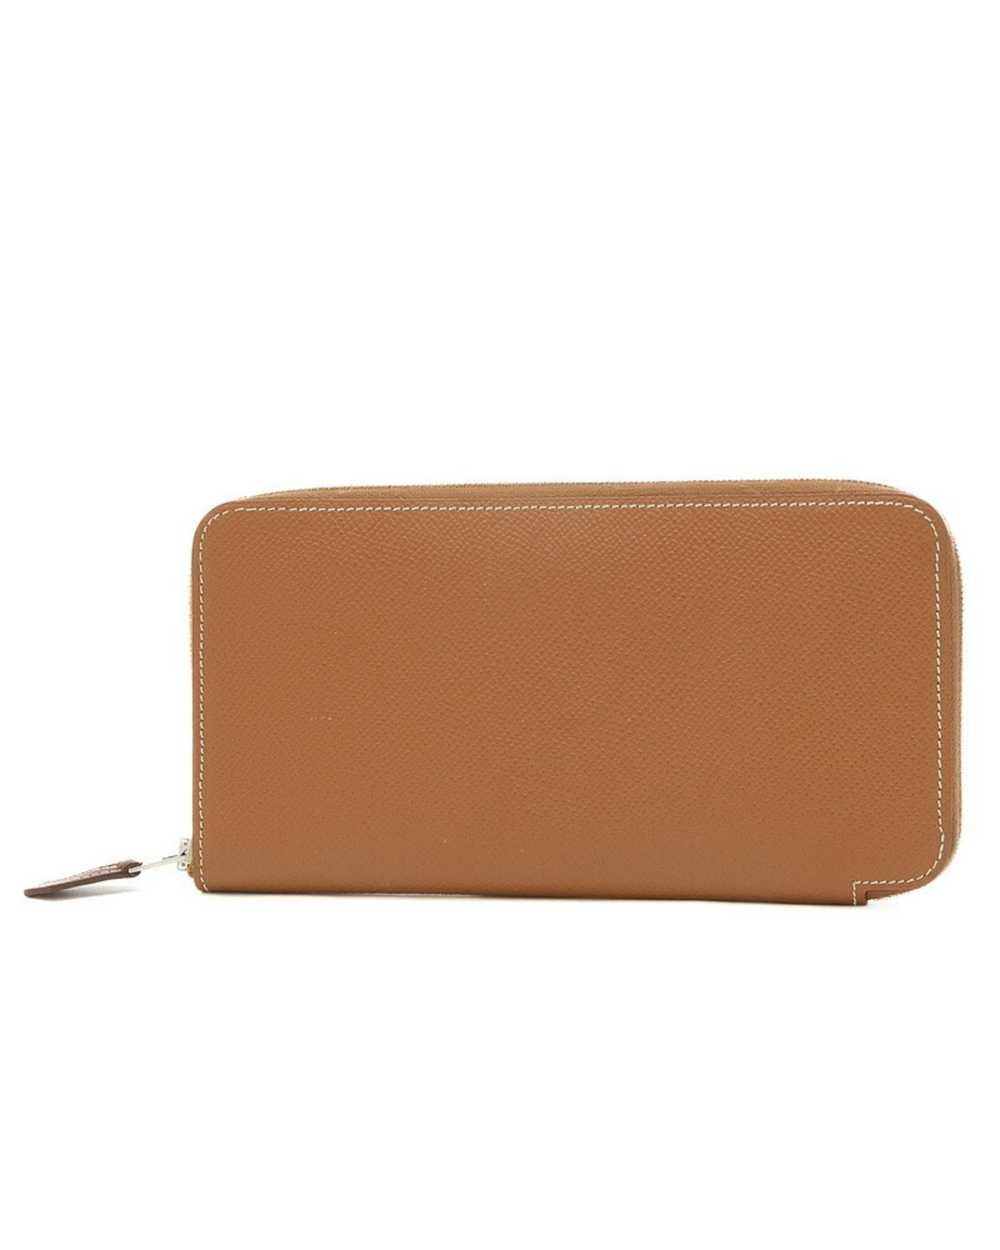 Hermes Classic Leather Wallet with Timeless Desig… - image 6